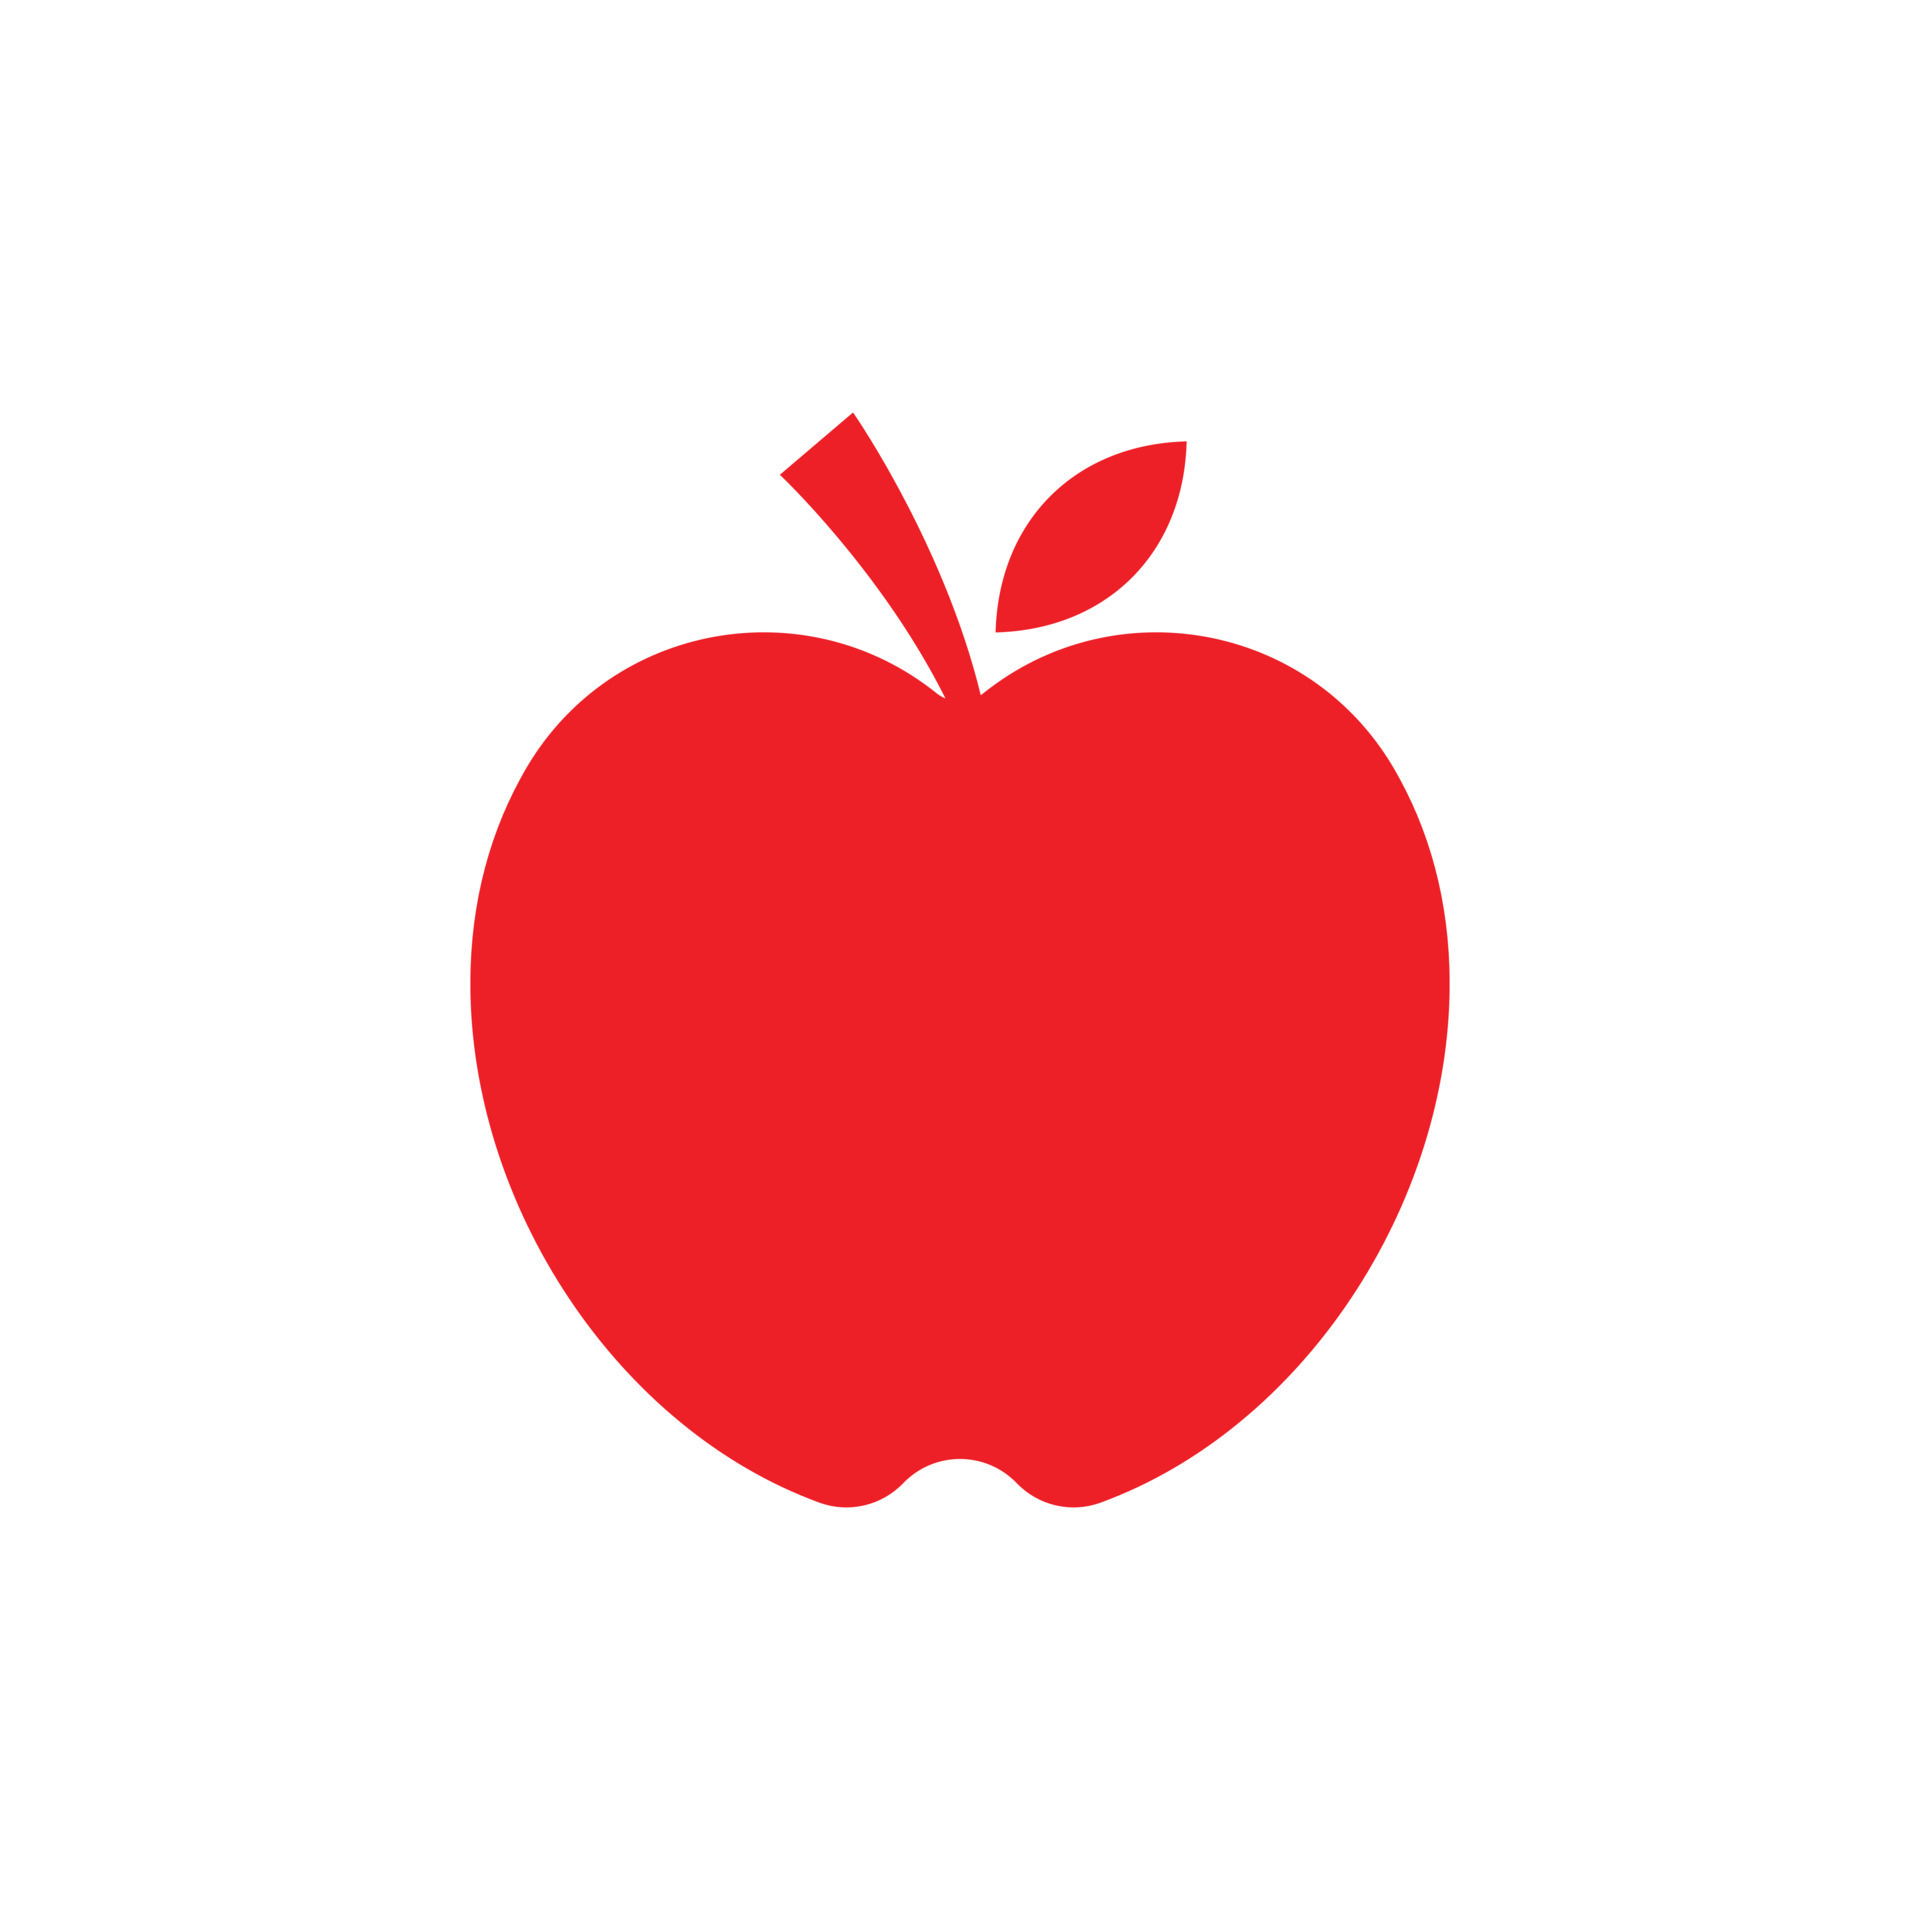 red vector apple solid icon isolated on white background. apple in a simple flat trendy modern style for your website design, logo, pictogram, and mobile application 10791039 Vector